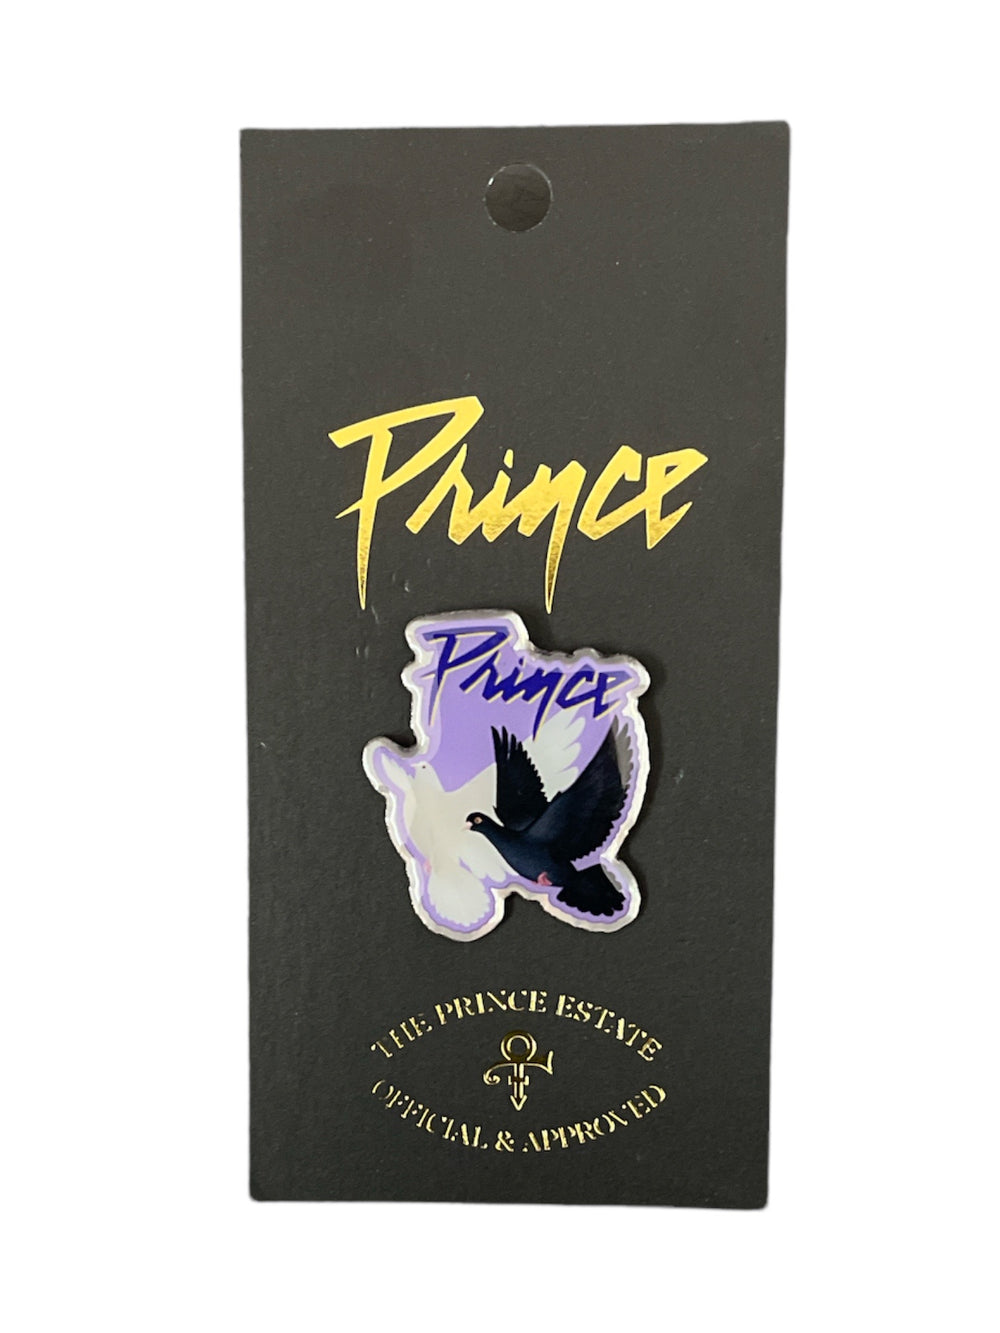 Prince – Paisley Park Official Acrylic Pin Badge Brand New Doves